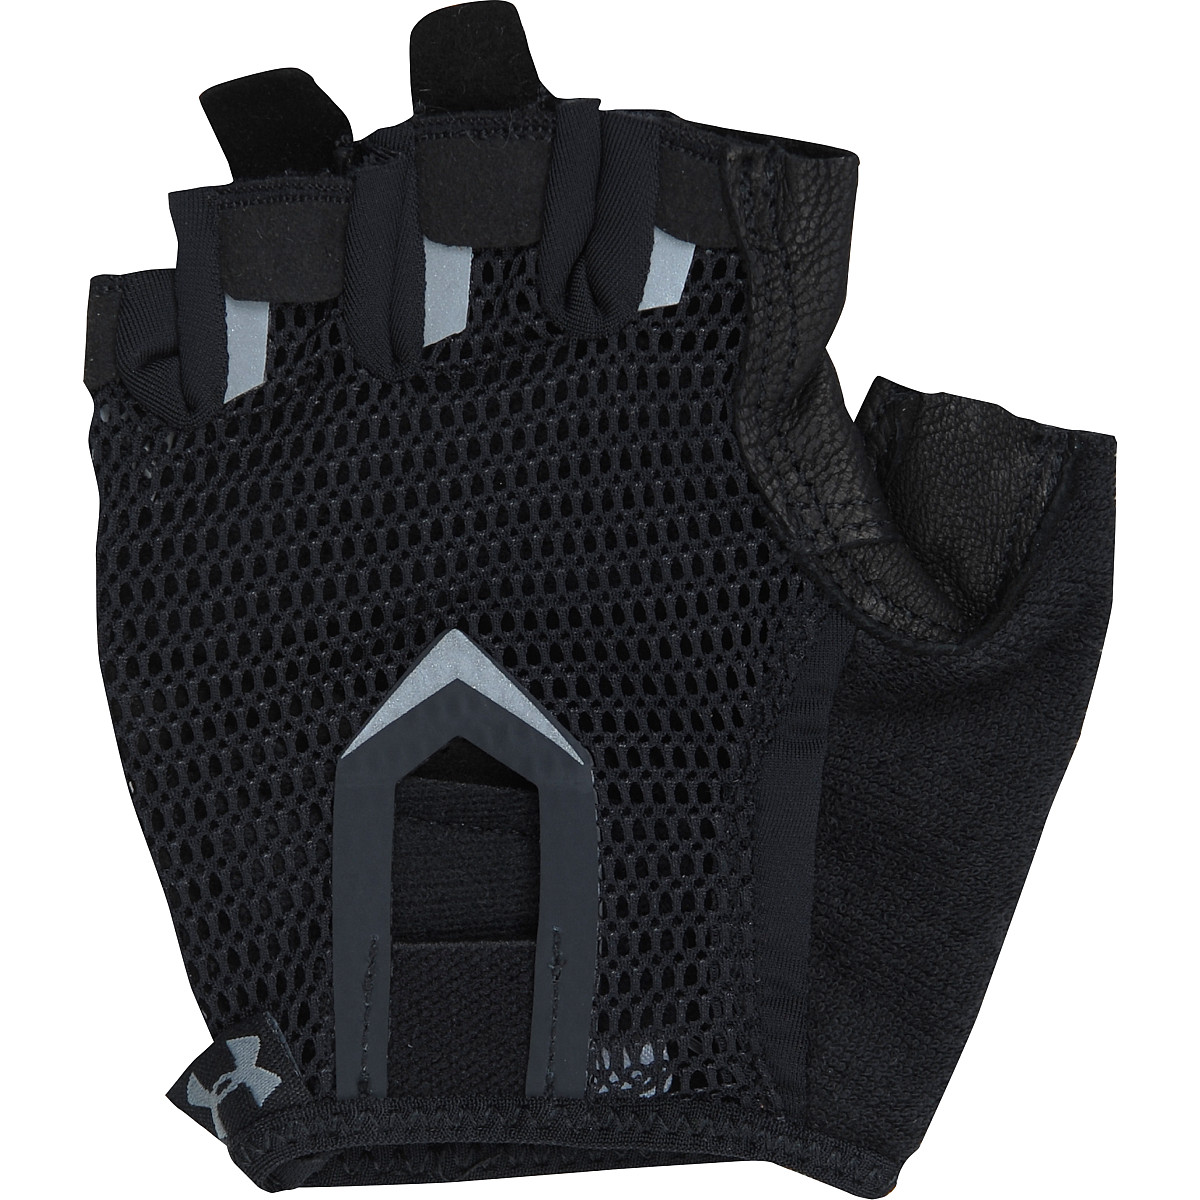 Accessories | Under armour Resistor Glove | Fitness